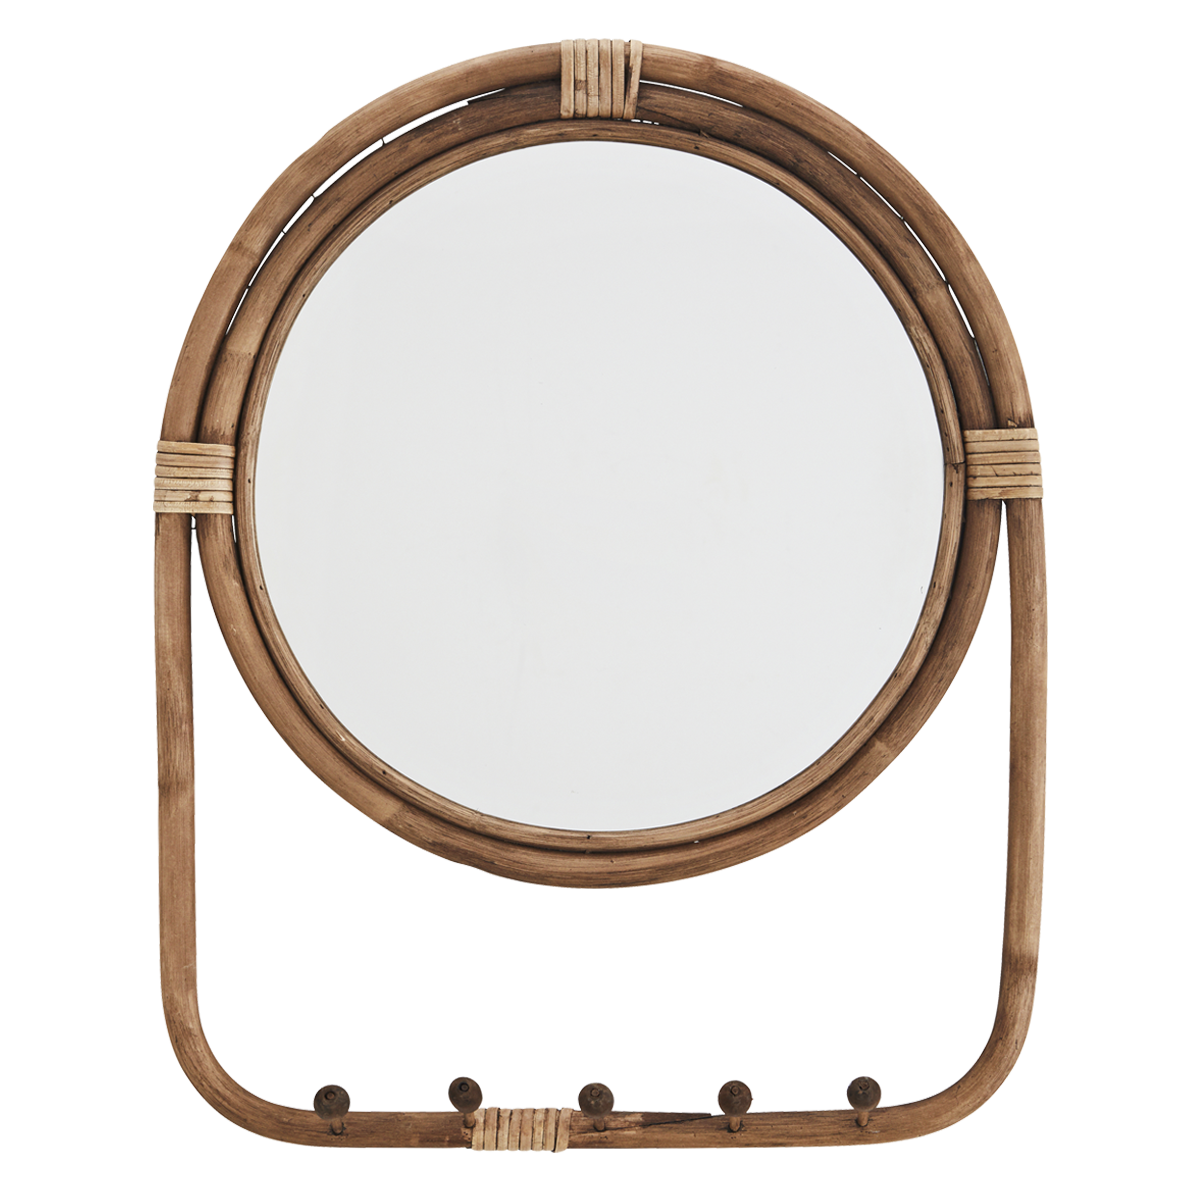 Mirror w/ rattan frame and hooks